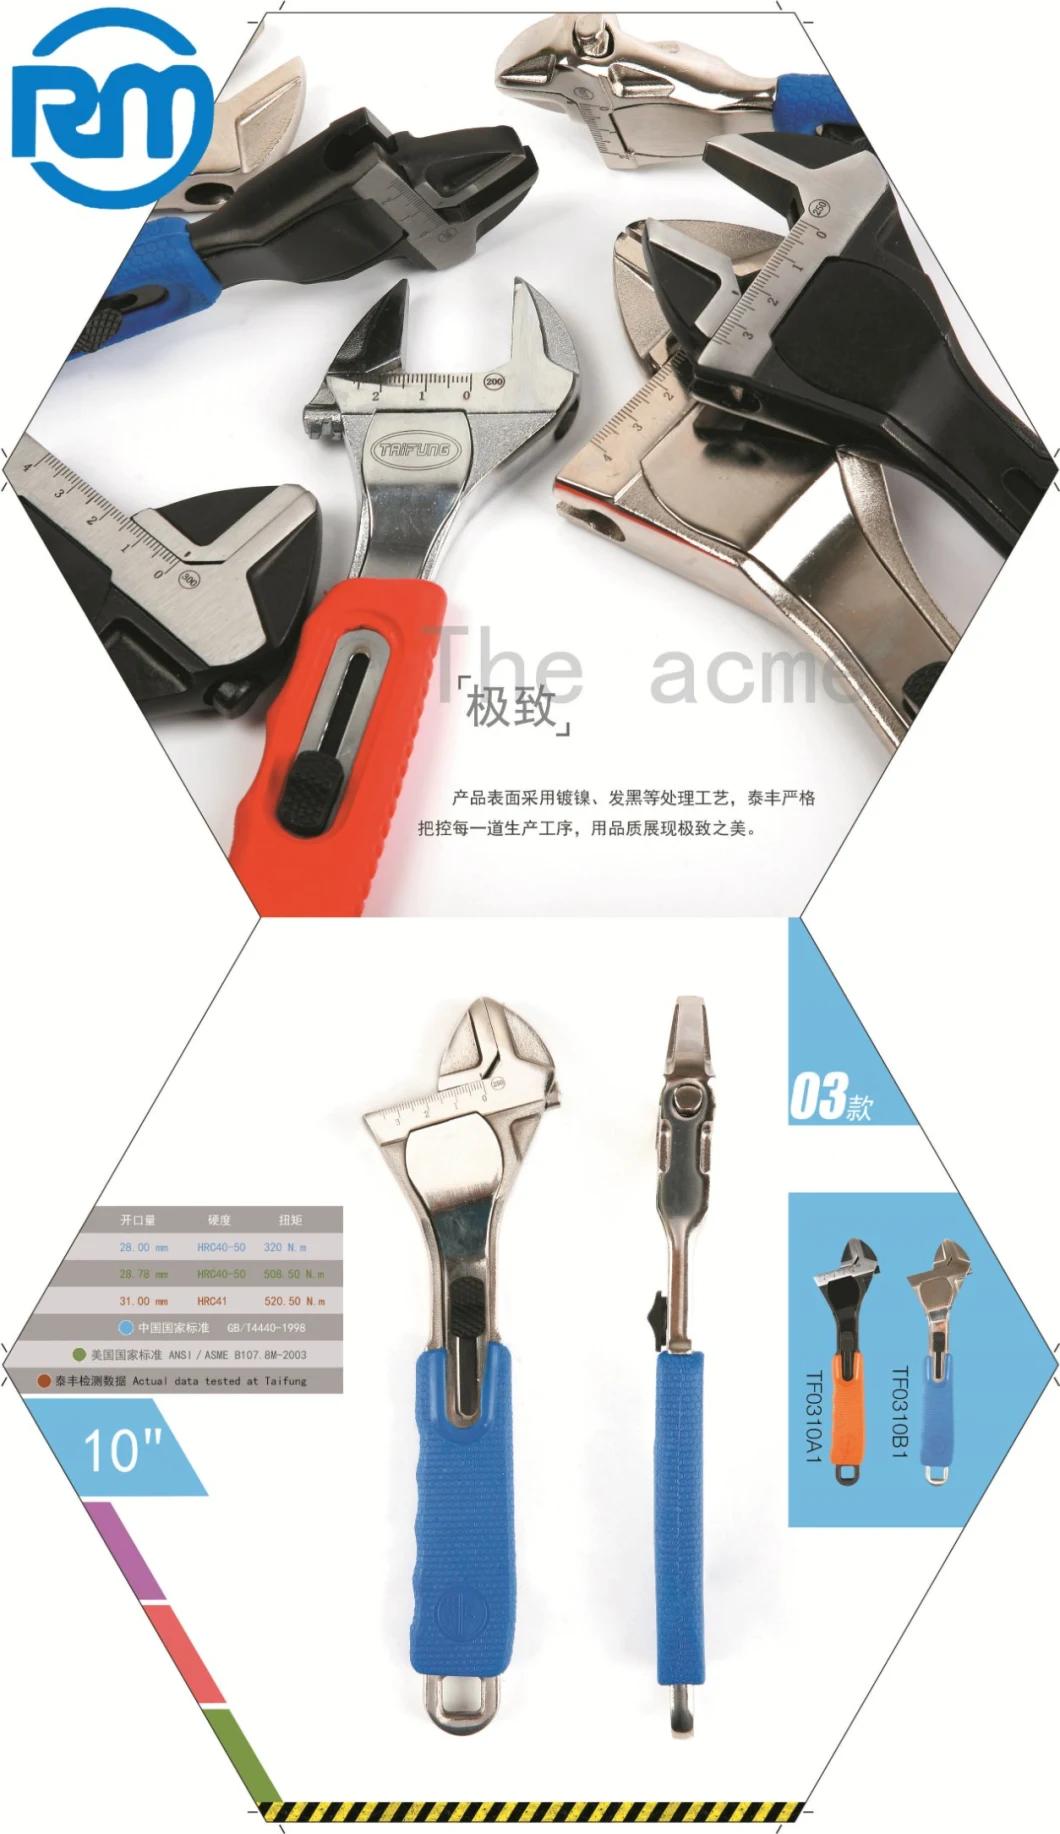 Easy Maintenance Various Sizes Ratchet Spanner Combination Wrench Professional Efficiency Sliding Adjusting Button Fashion Hand Tools, Tools Sets Socket and Wr